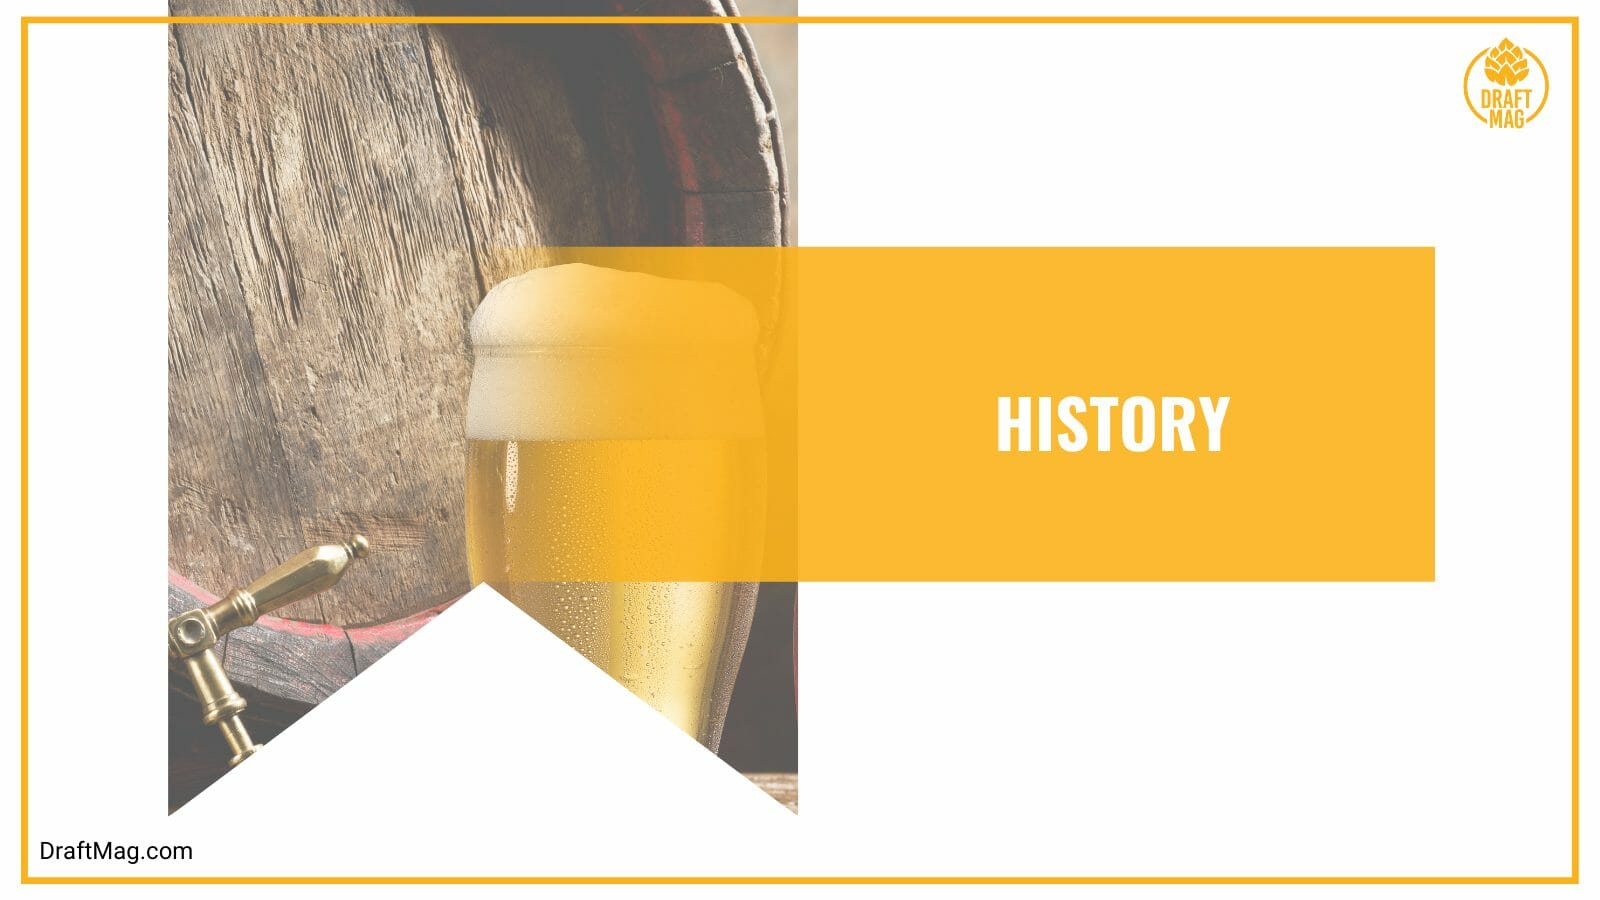 History of old german lager